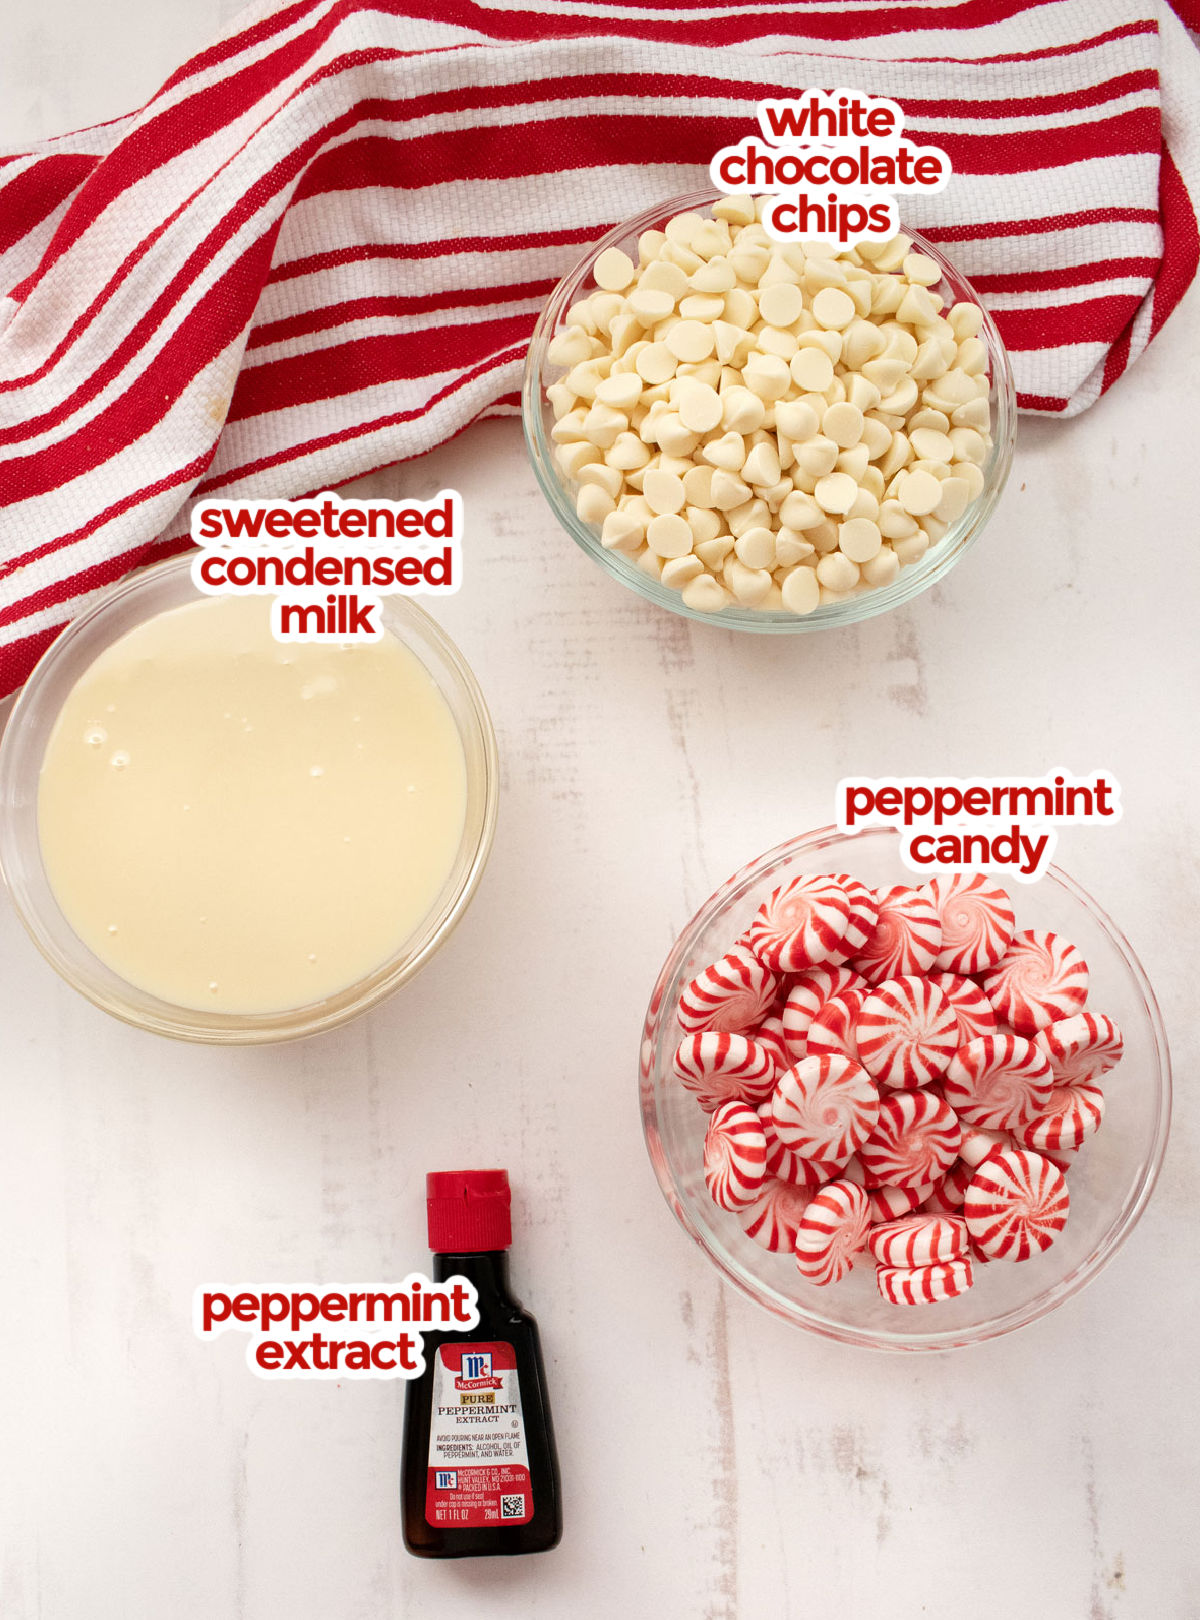 All the ingredients you will need to make Peppermint Fudge including White Chocolate Chips, Sweetened Condensed Milk, Peppermint Candy and Peppermint Extract.